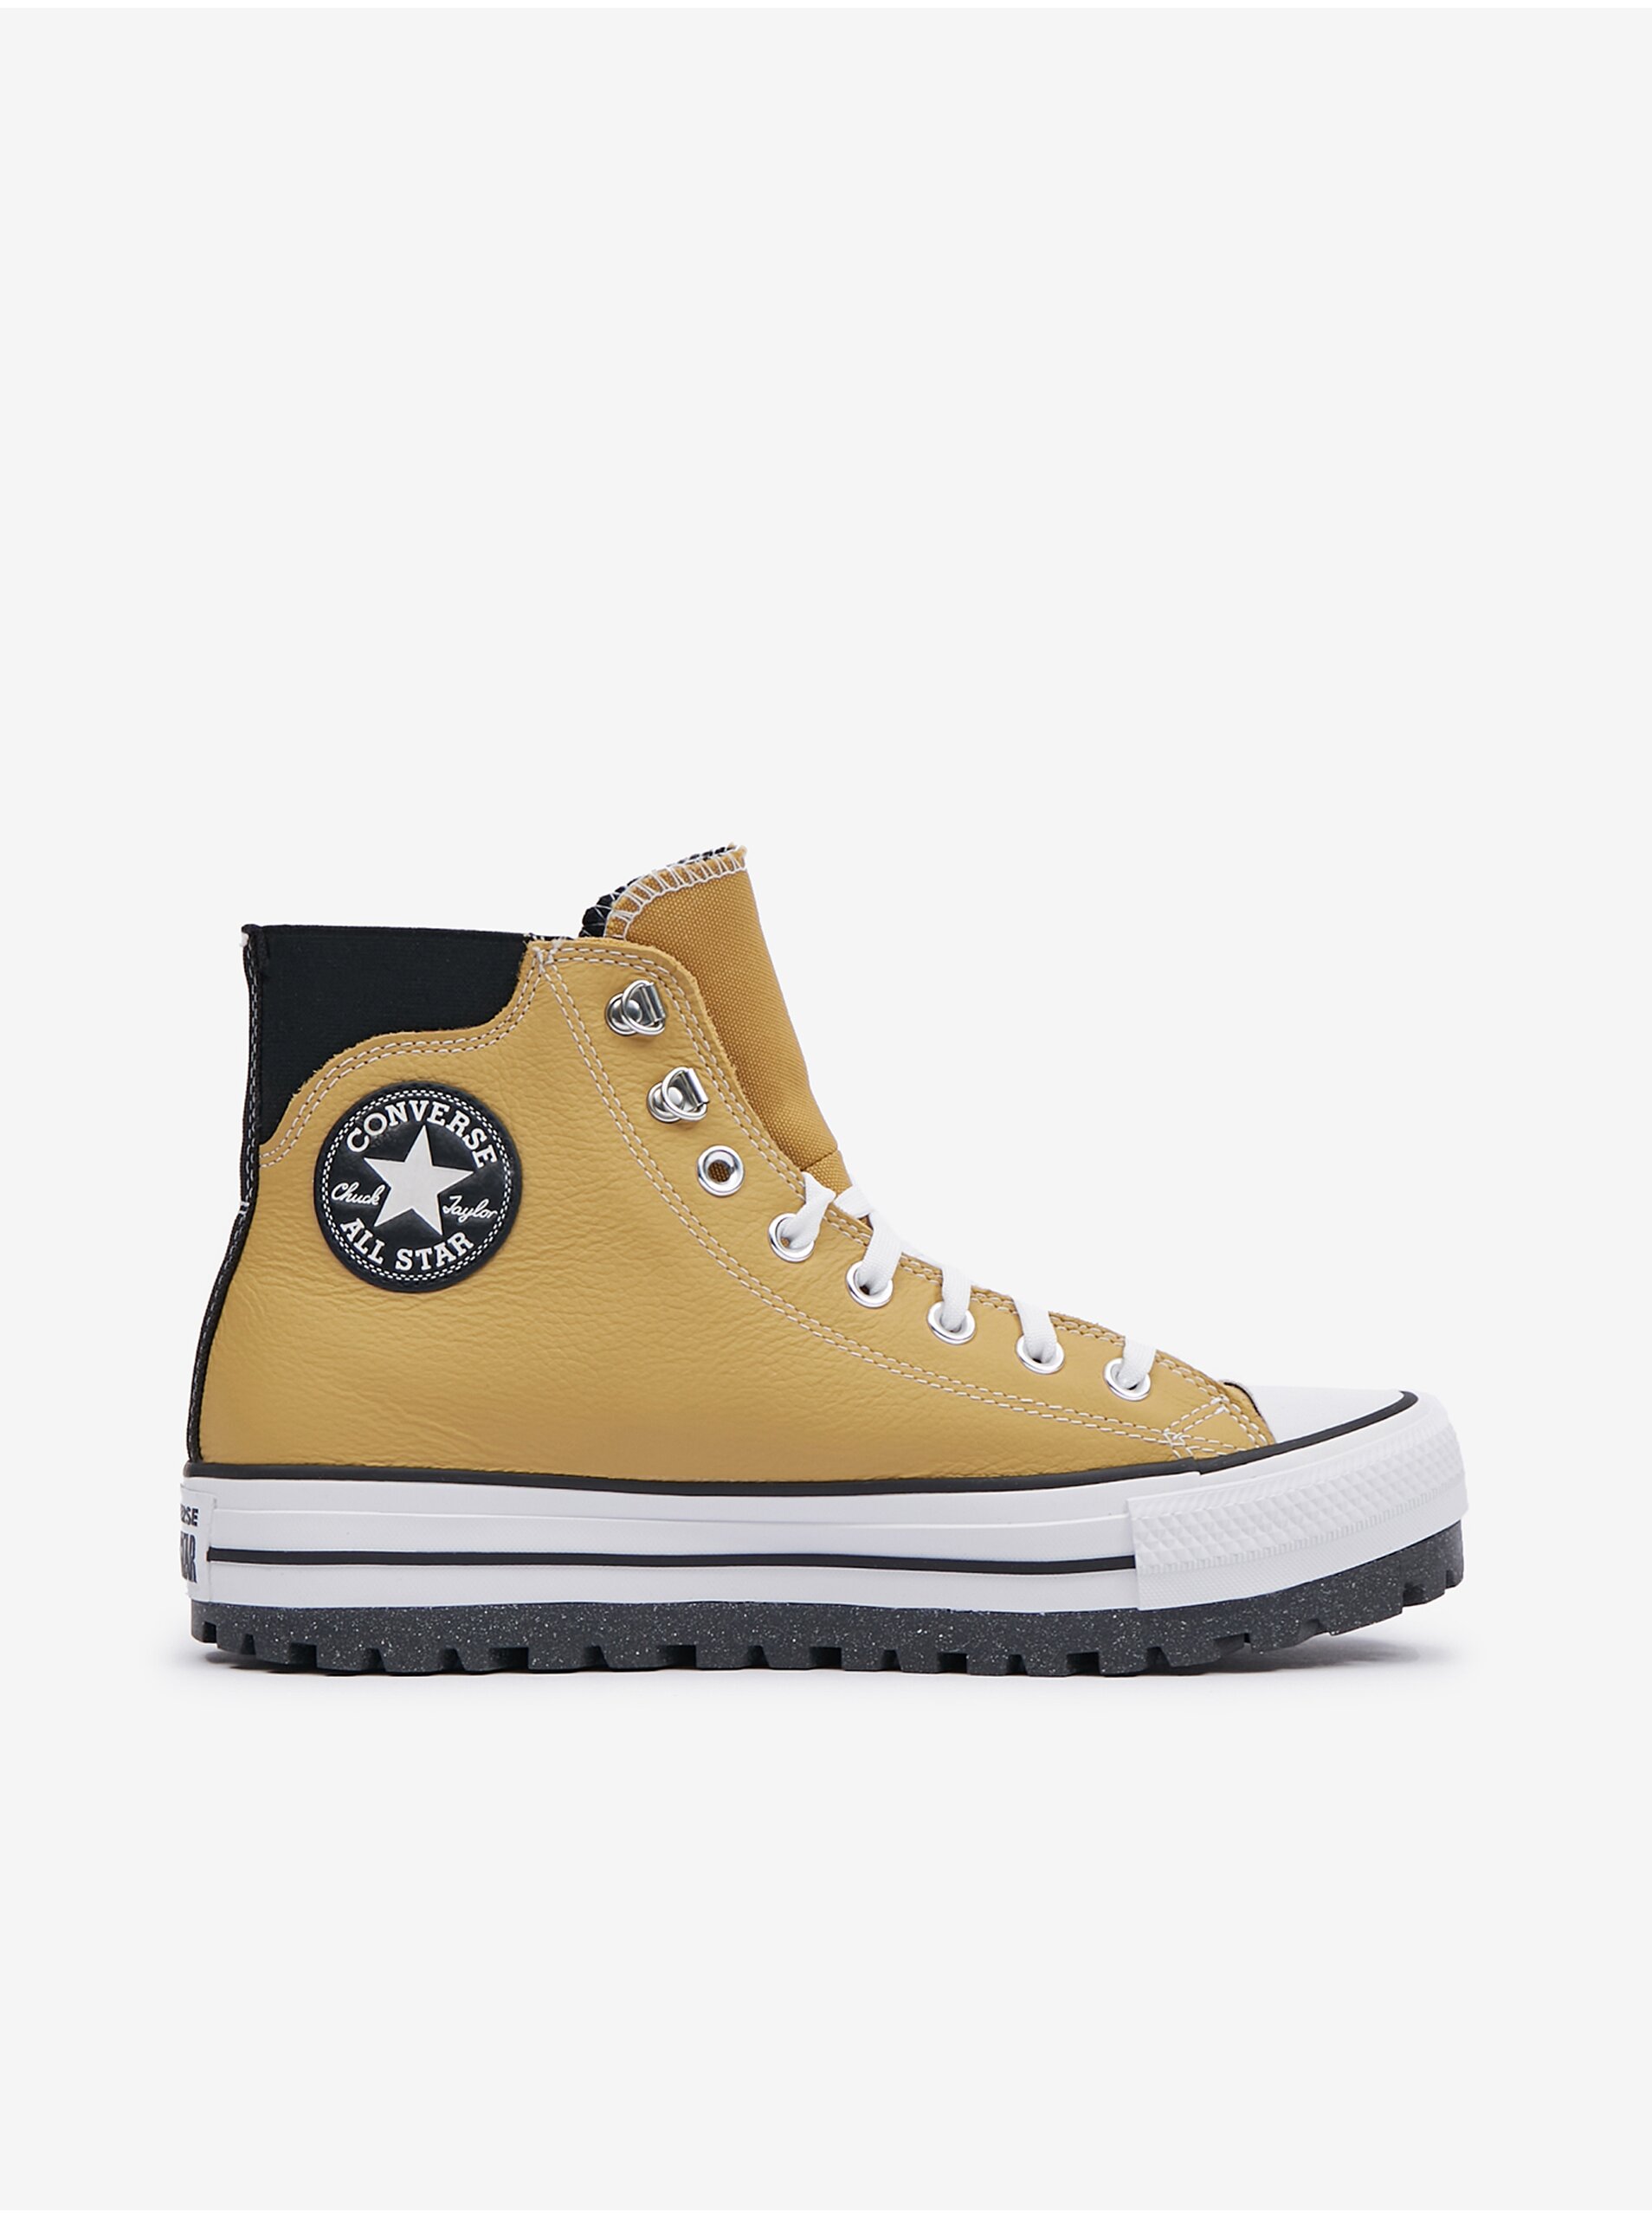 Men's Converse Chuck Taylor A Mustard Leather Ankle Sneakers - Men's